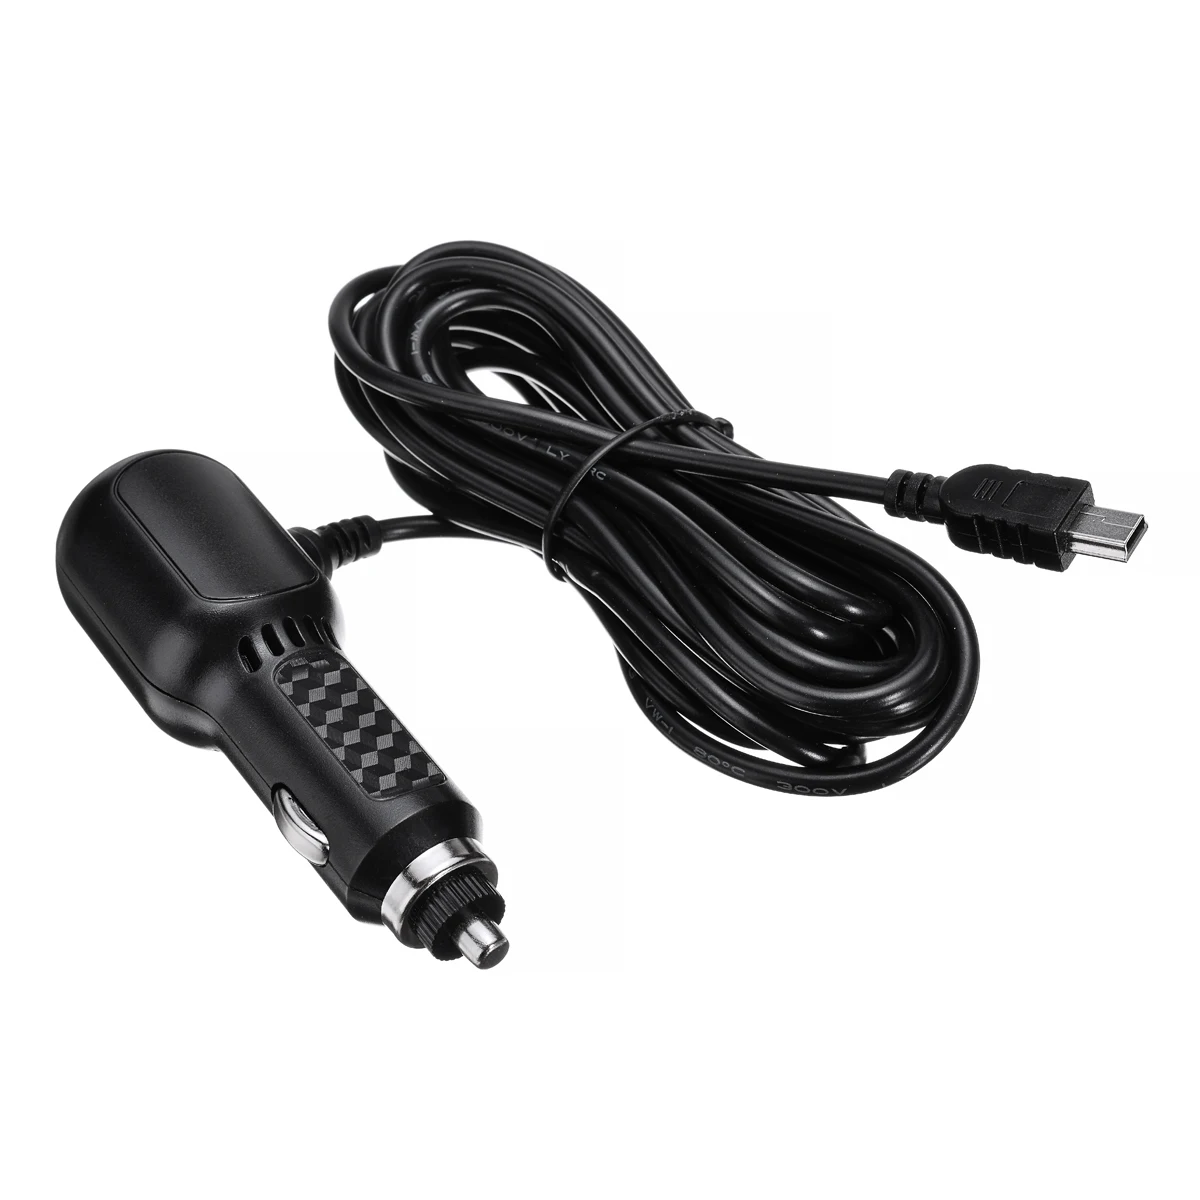 

Dual Mini USB Ports 5V 2A Driving Recorder Charger Adapter Lighter Cable Socket for DVR Vehicle Charging with 3.5 Meters Cable